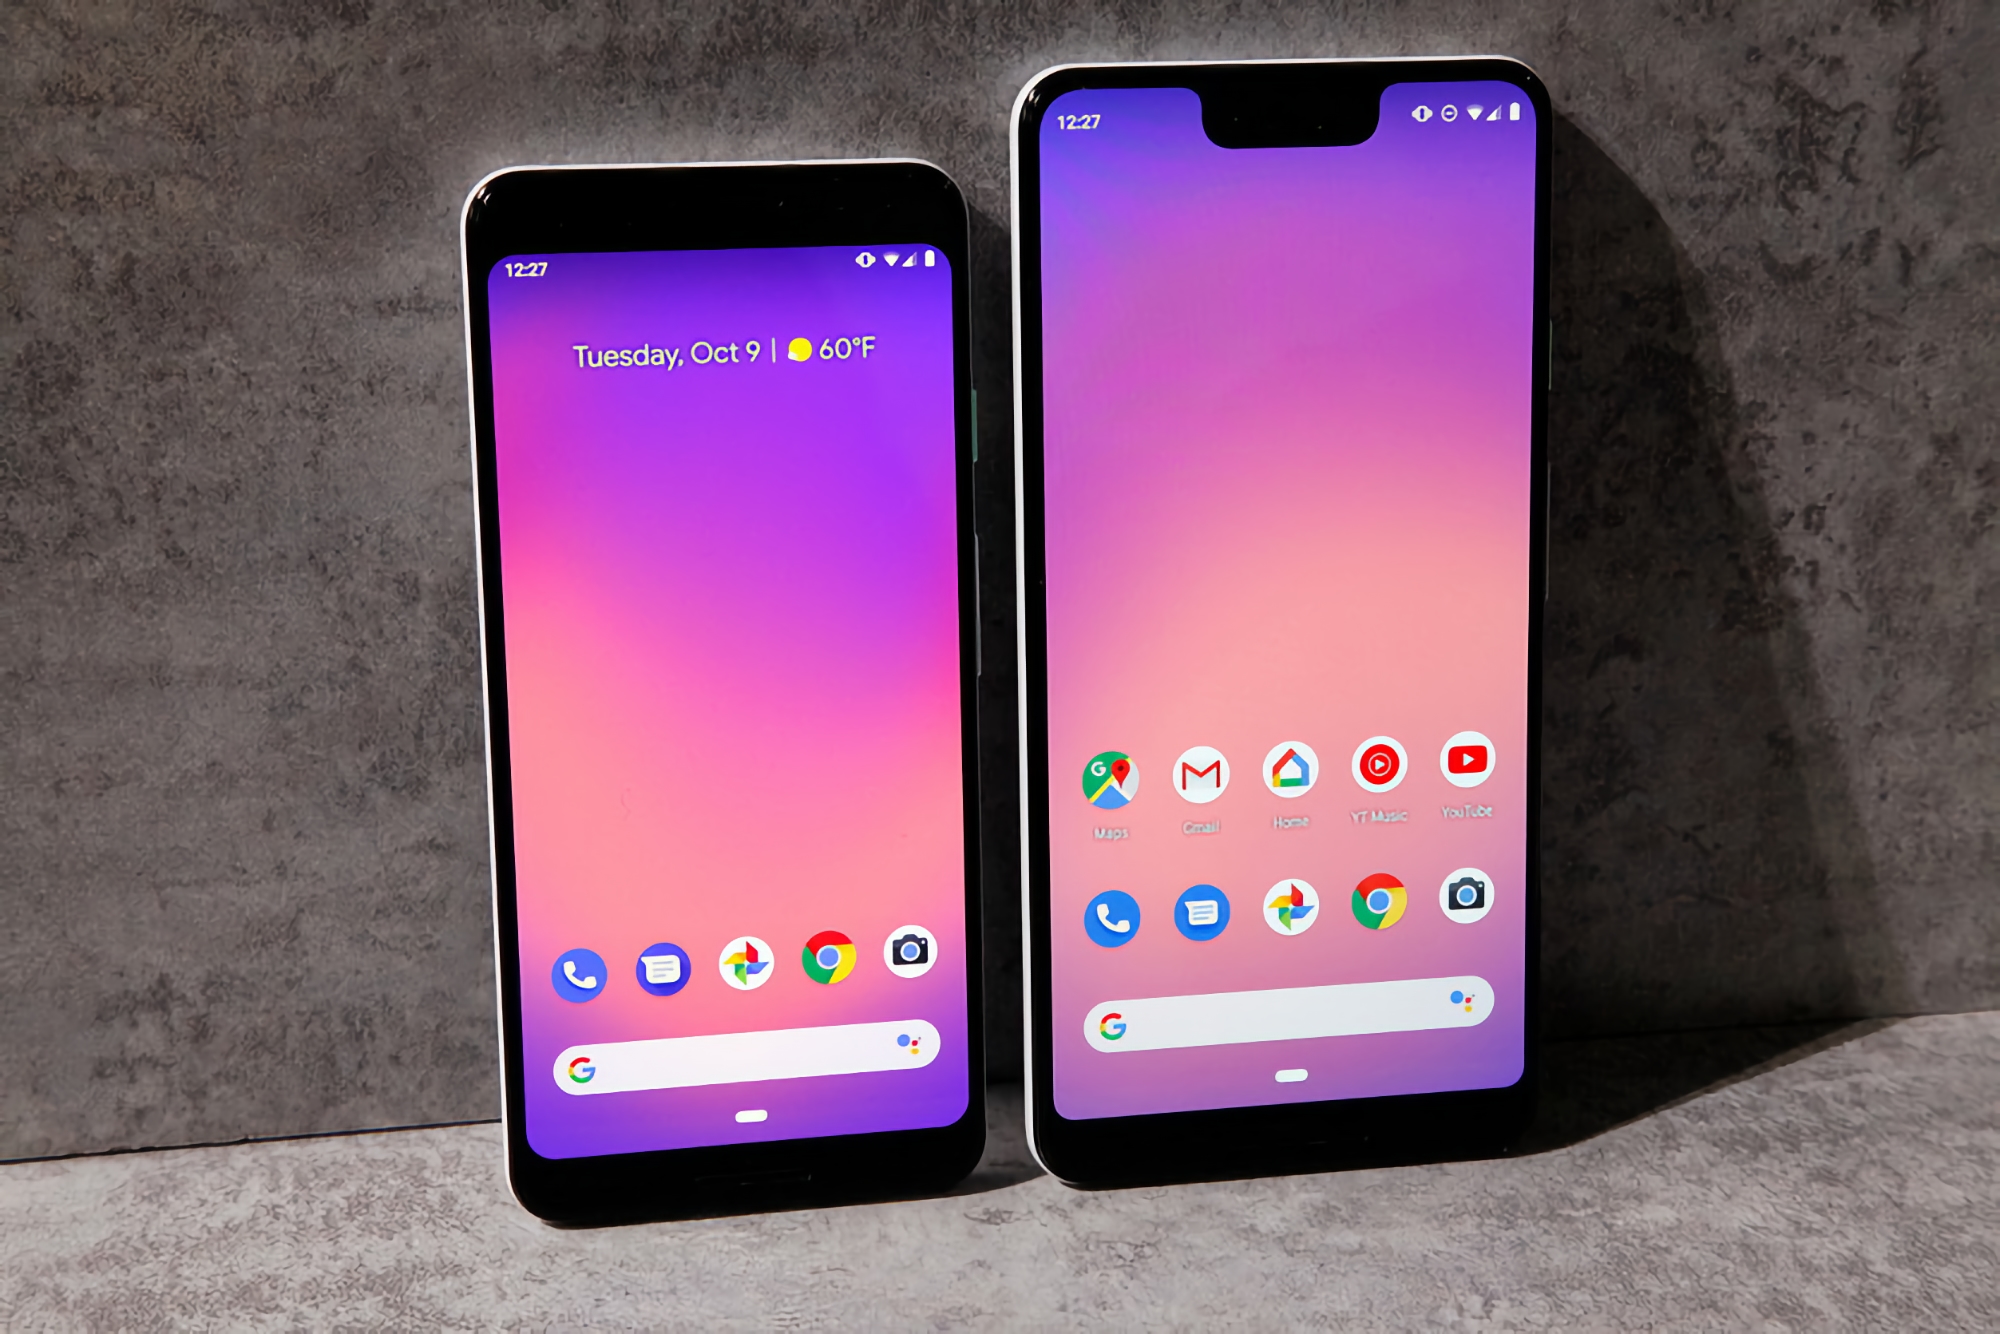 Time to retire: Google is ending support for the Pixel 3 and Pixel 3 XL